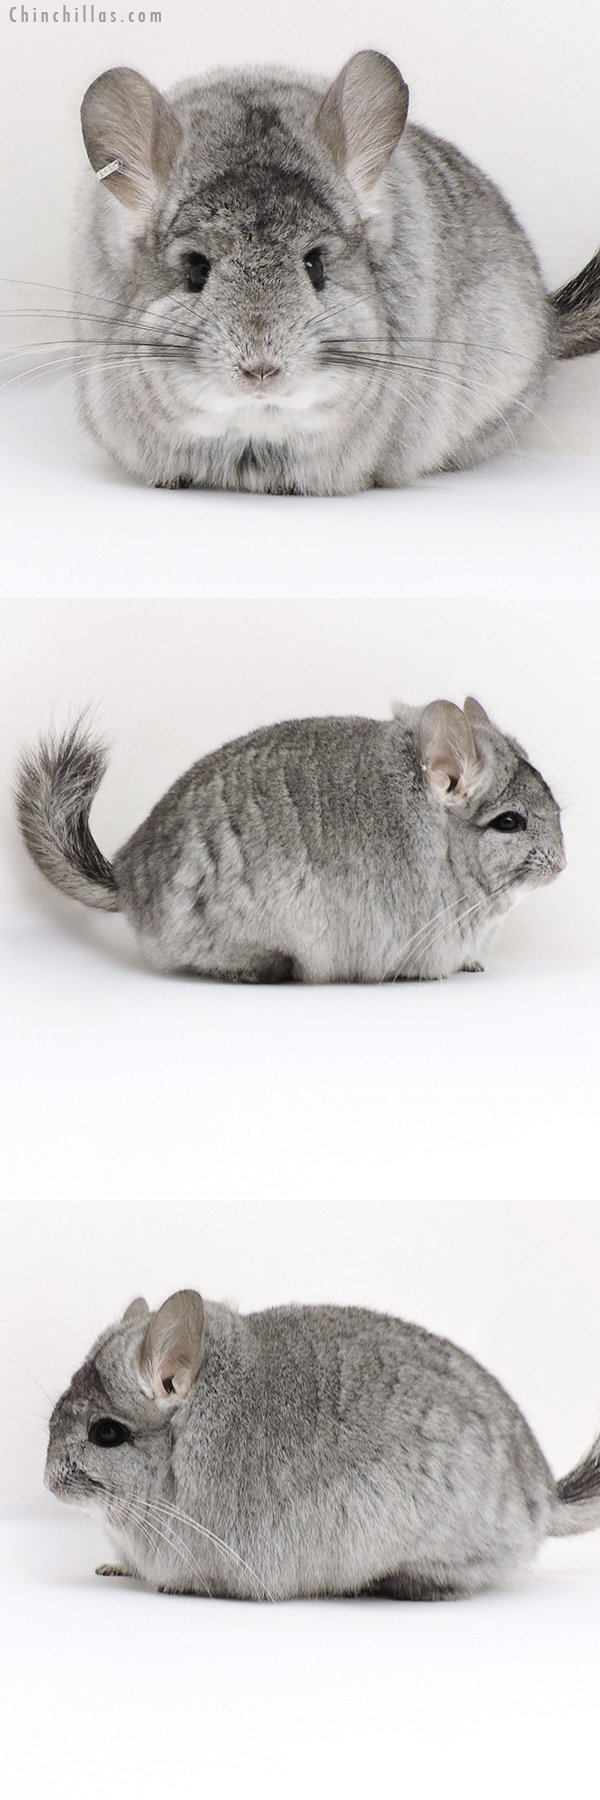 Chinchilla or related item offered for sale or export on Chinchillas.com - 18217 Standard ( Violet Carrier )  Royal Persian Angora Female Chinchilla